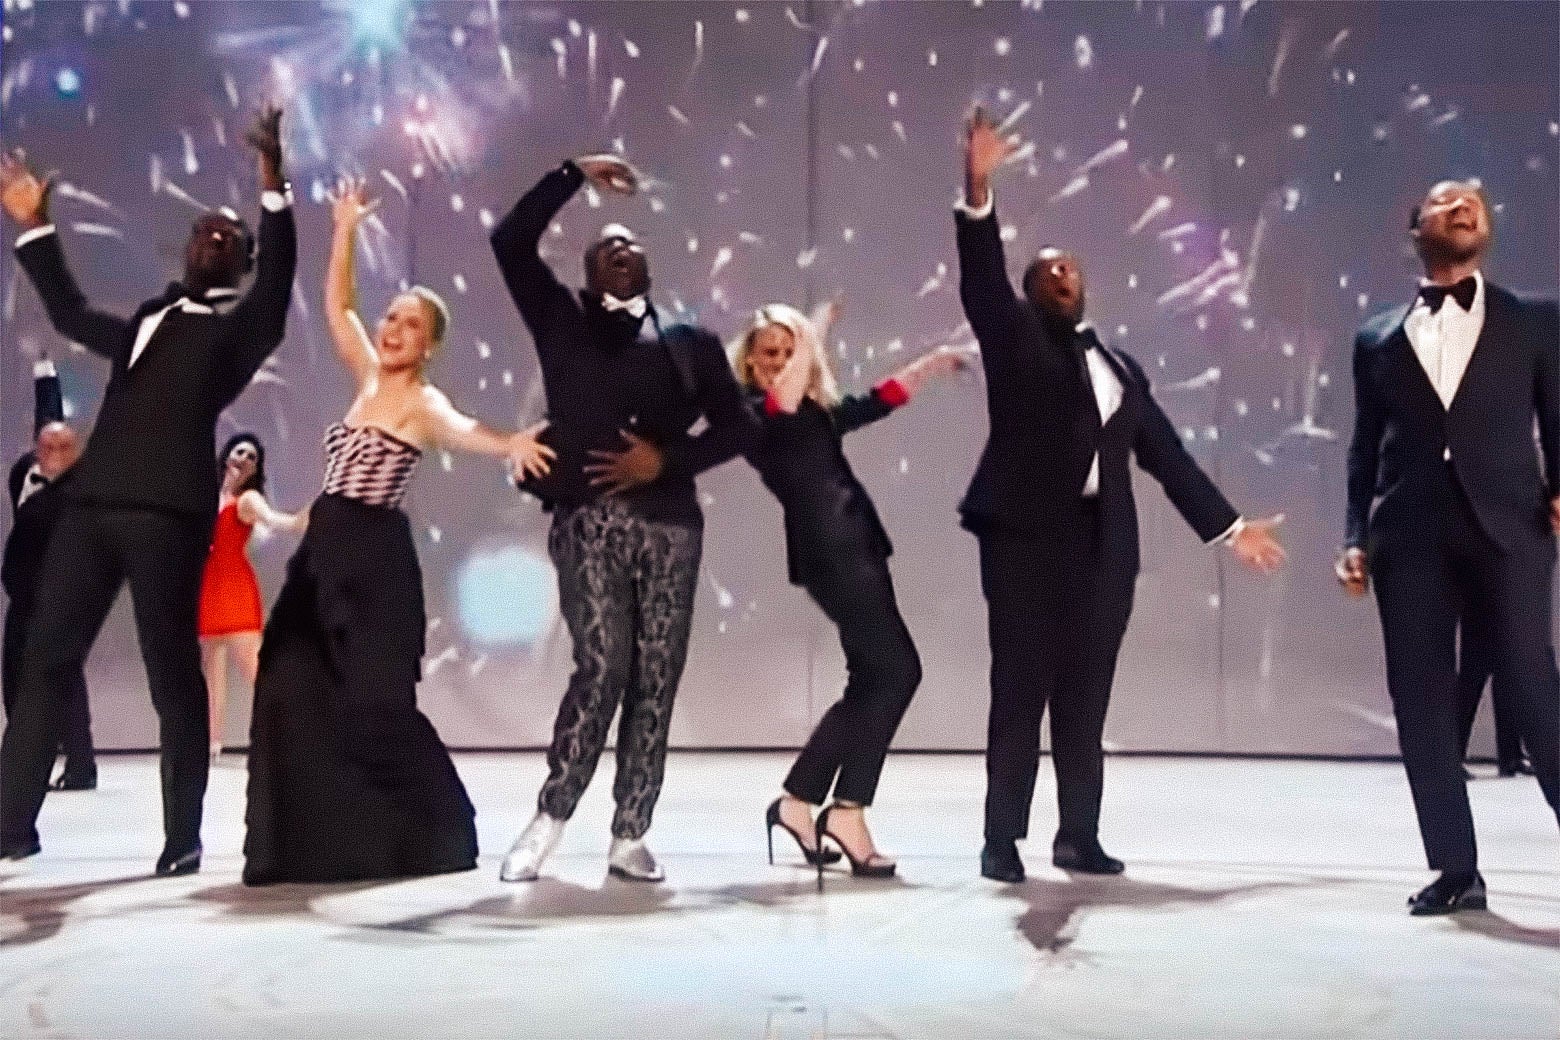 Fireworks go off on a projection screen behind a bunch of dancing TV stars.